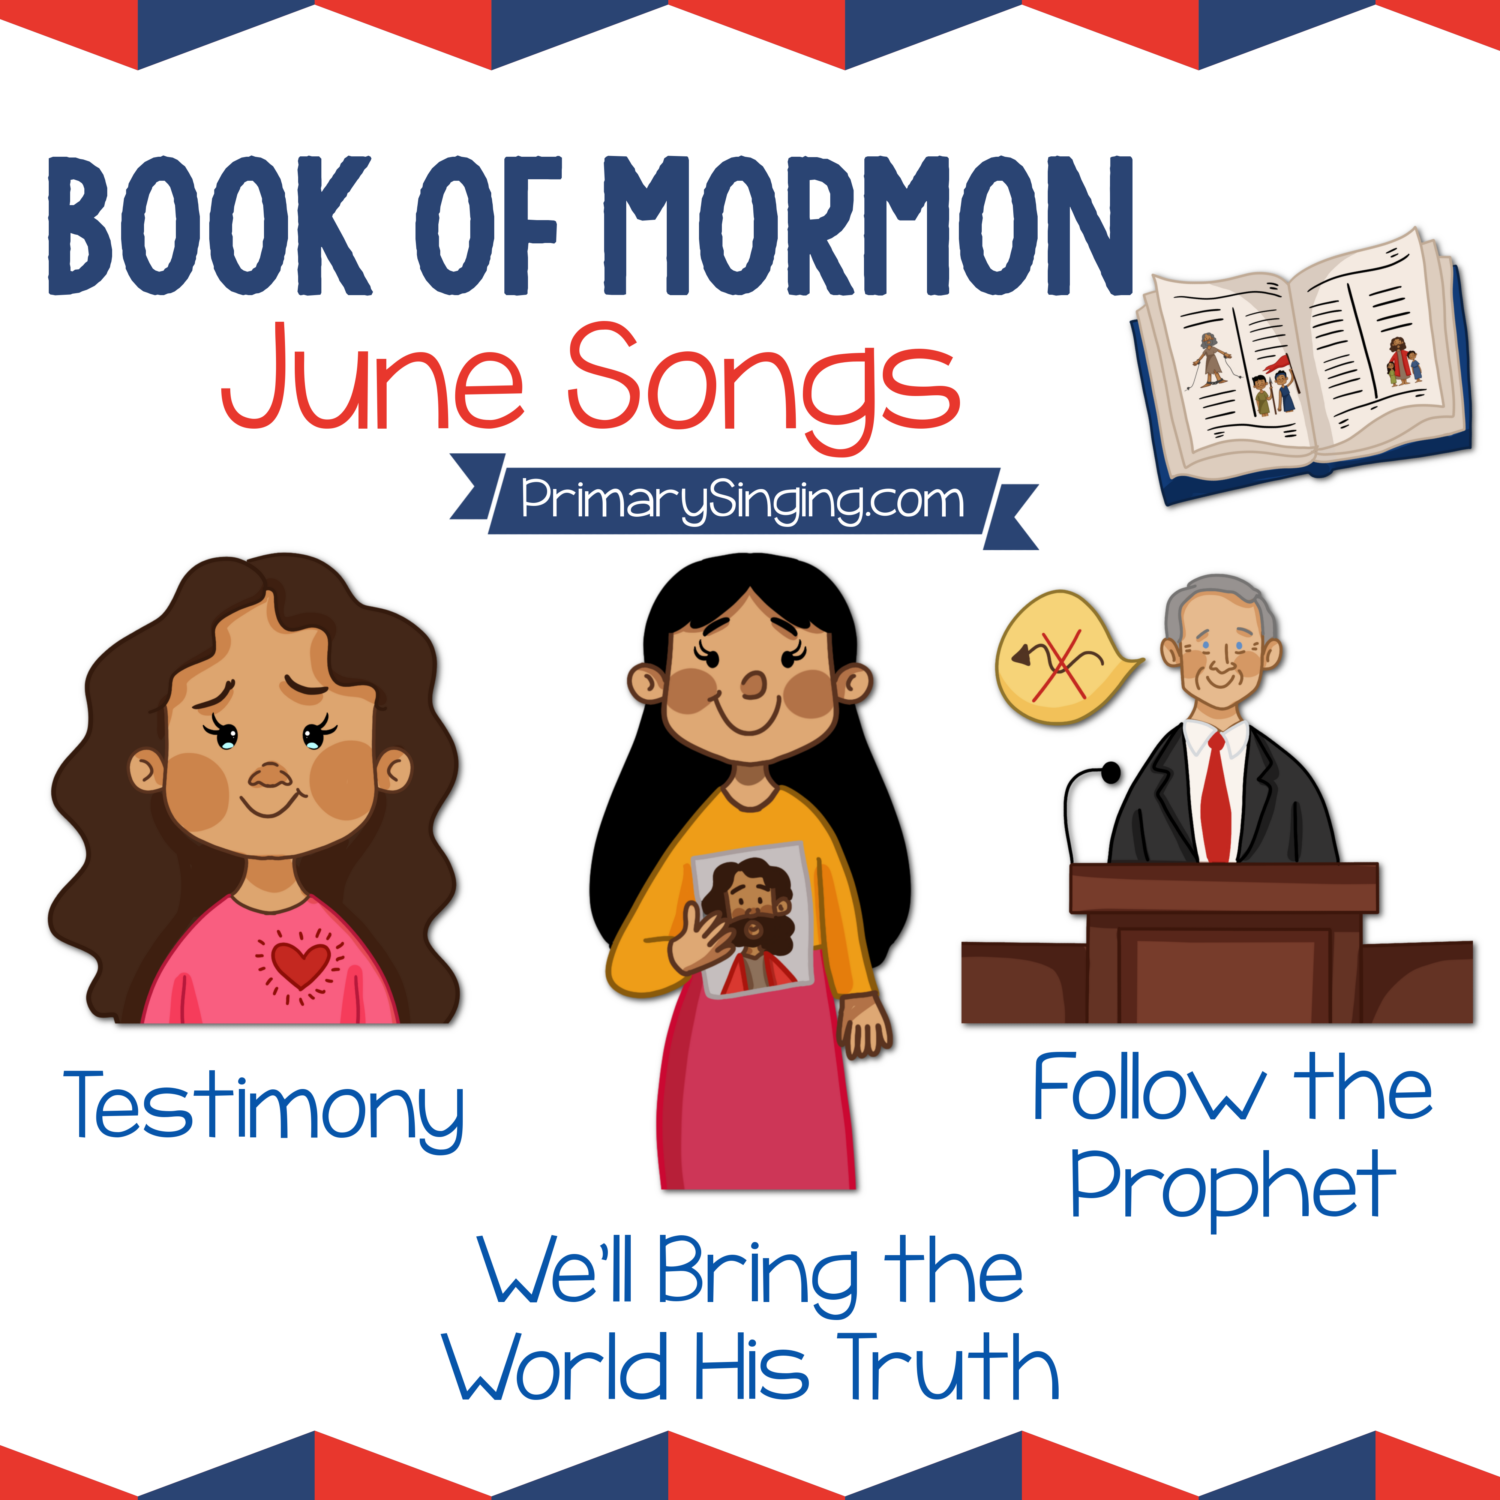 Book of Mormon June Song List - Testimony, We'll Bring the World His Truth, and Follow the Prophet. Teach these 3 great Primary songs during Singing Time or home Come Follow Me lessons.